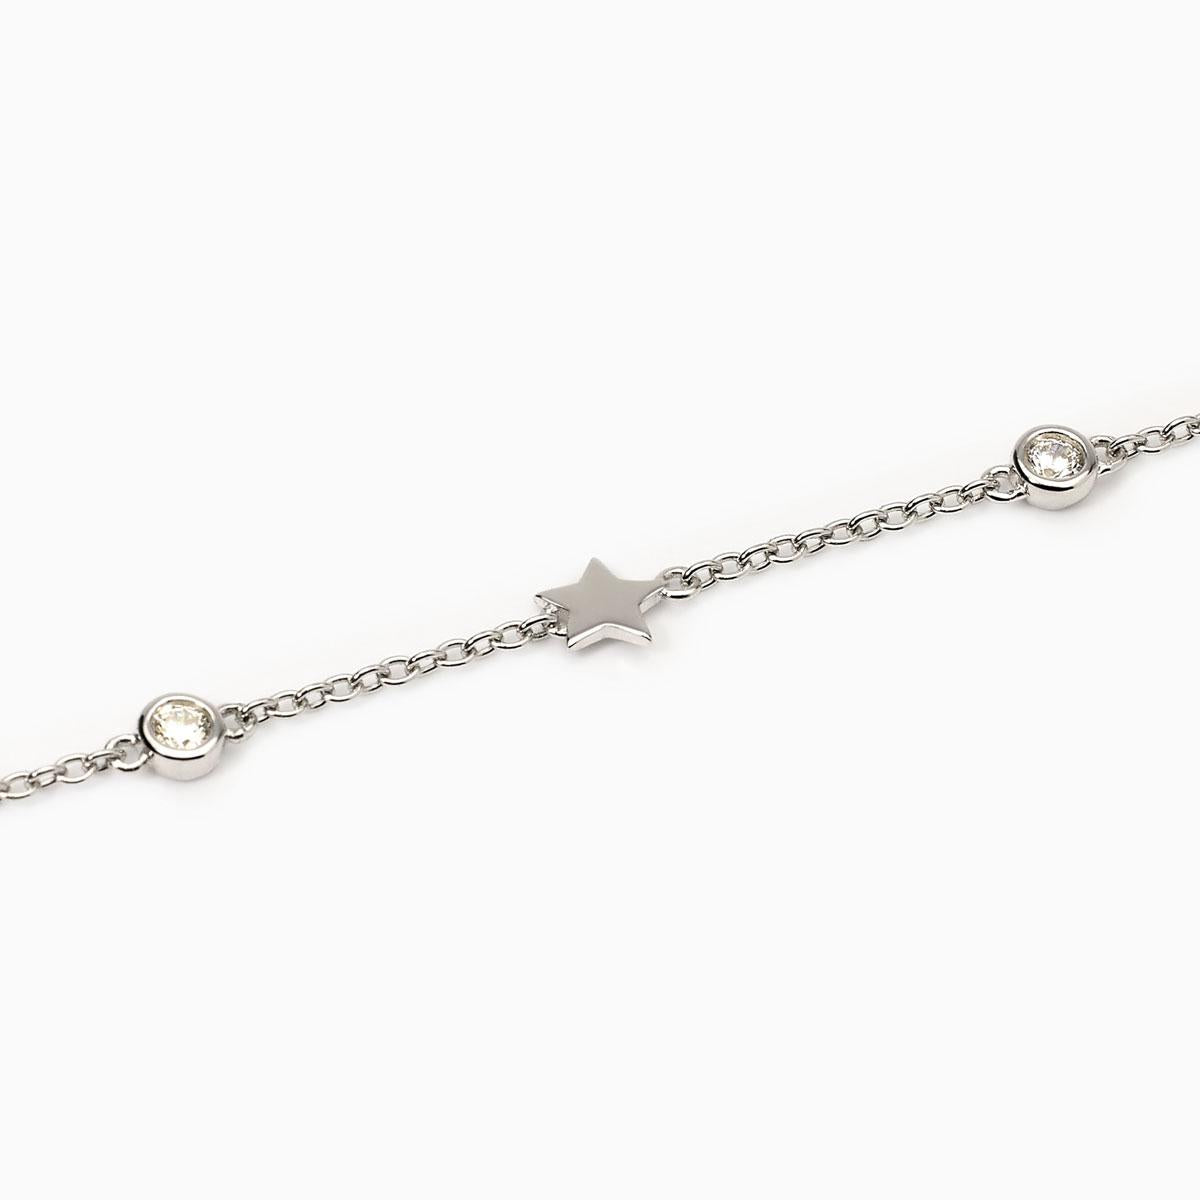 Mabina Woman - Silver bracelet with NARCISO stars - 533888